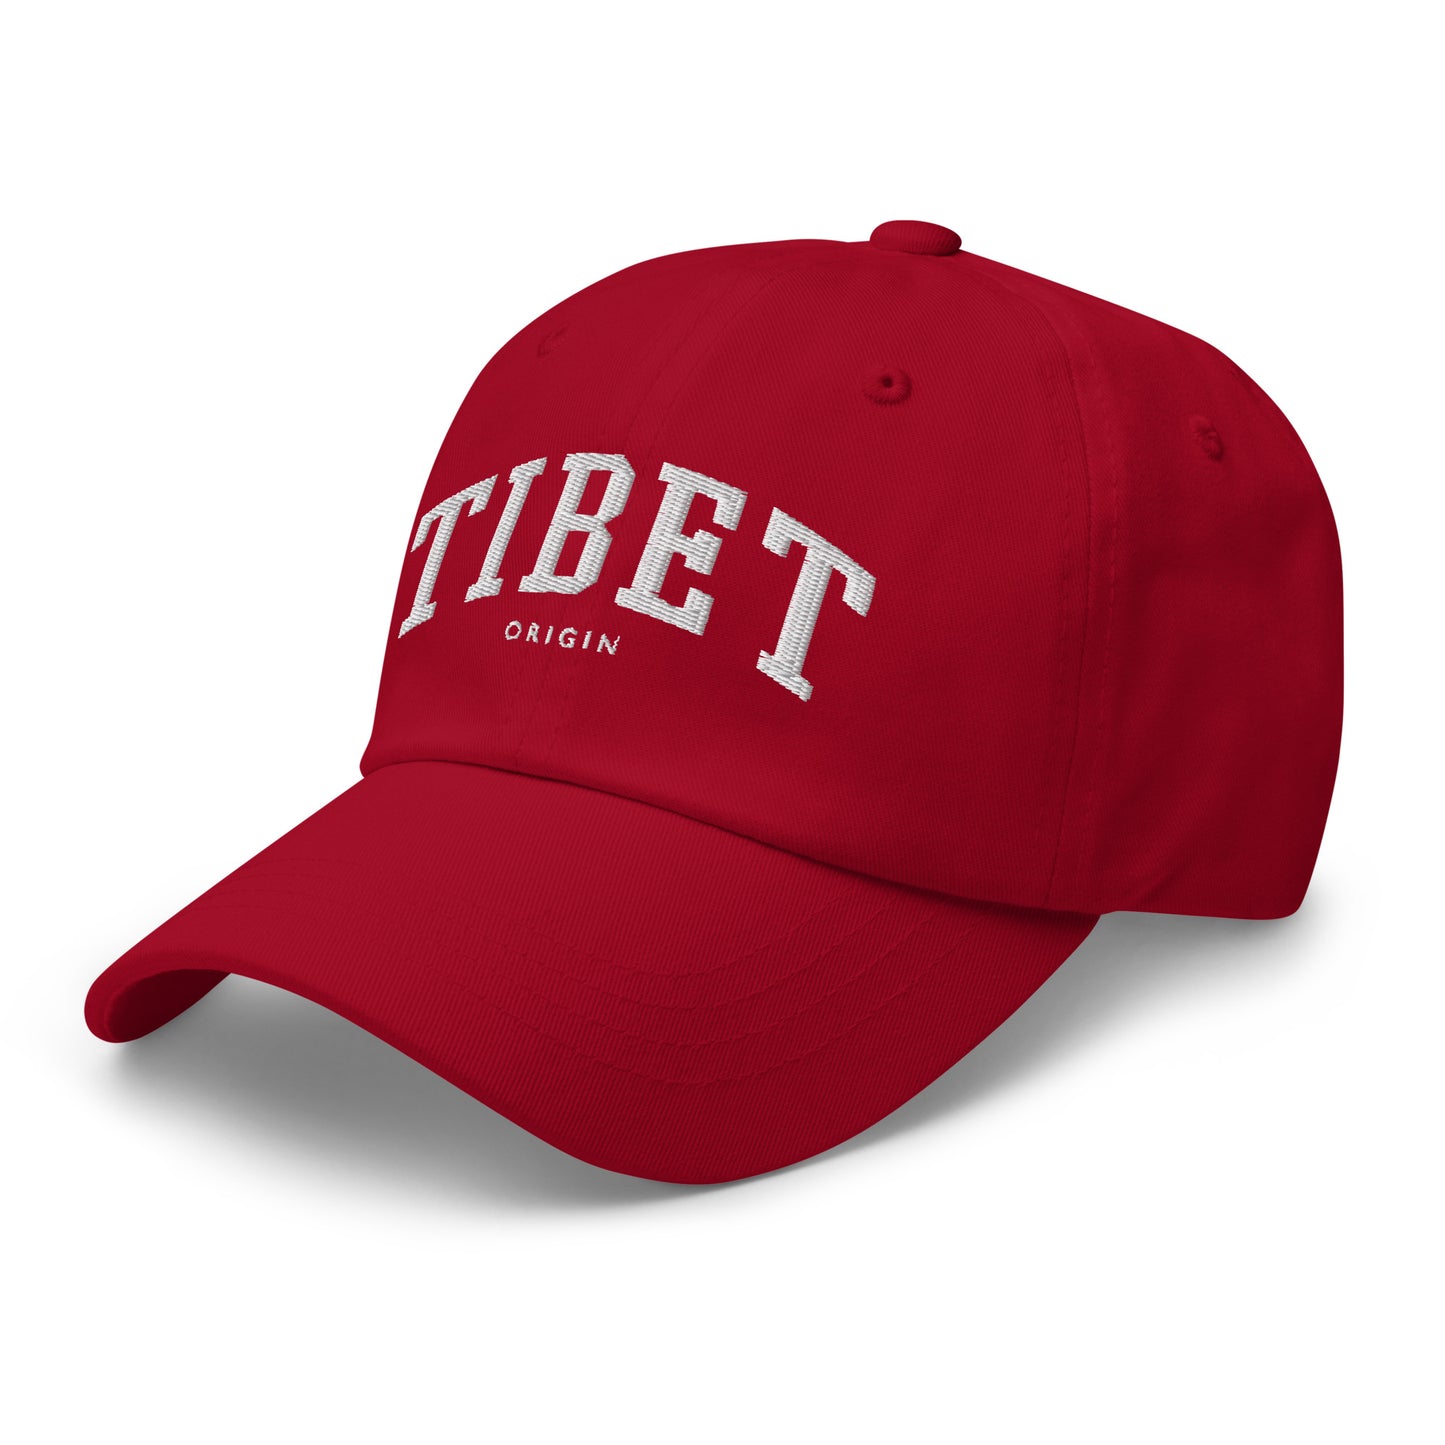 TIBET ORIGIN HATS are curated and designed under Dzimig Studios' Tibet Archive Project. The hats come in various colors to match your style and sits on your head just like a crow. Each hat are embroidered and are available in four distinct colors of your choice.